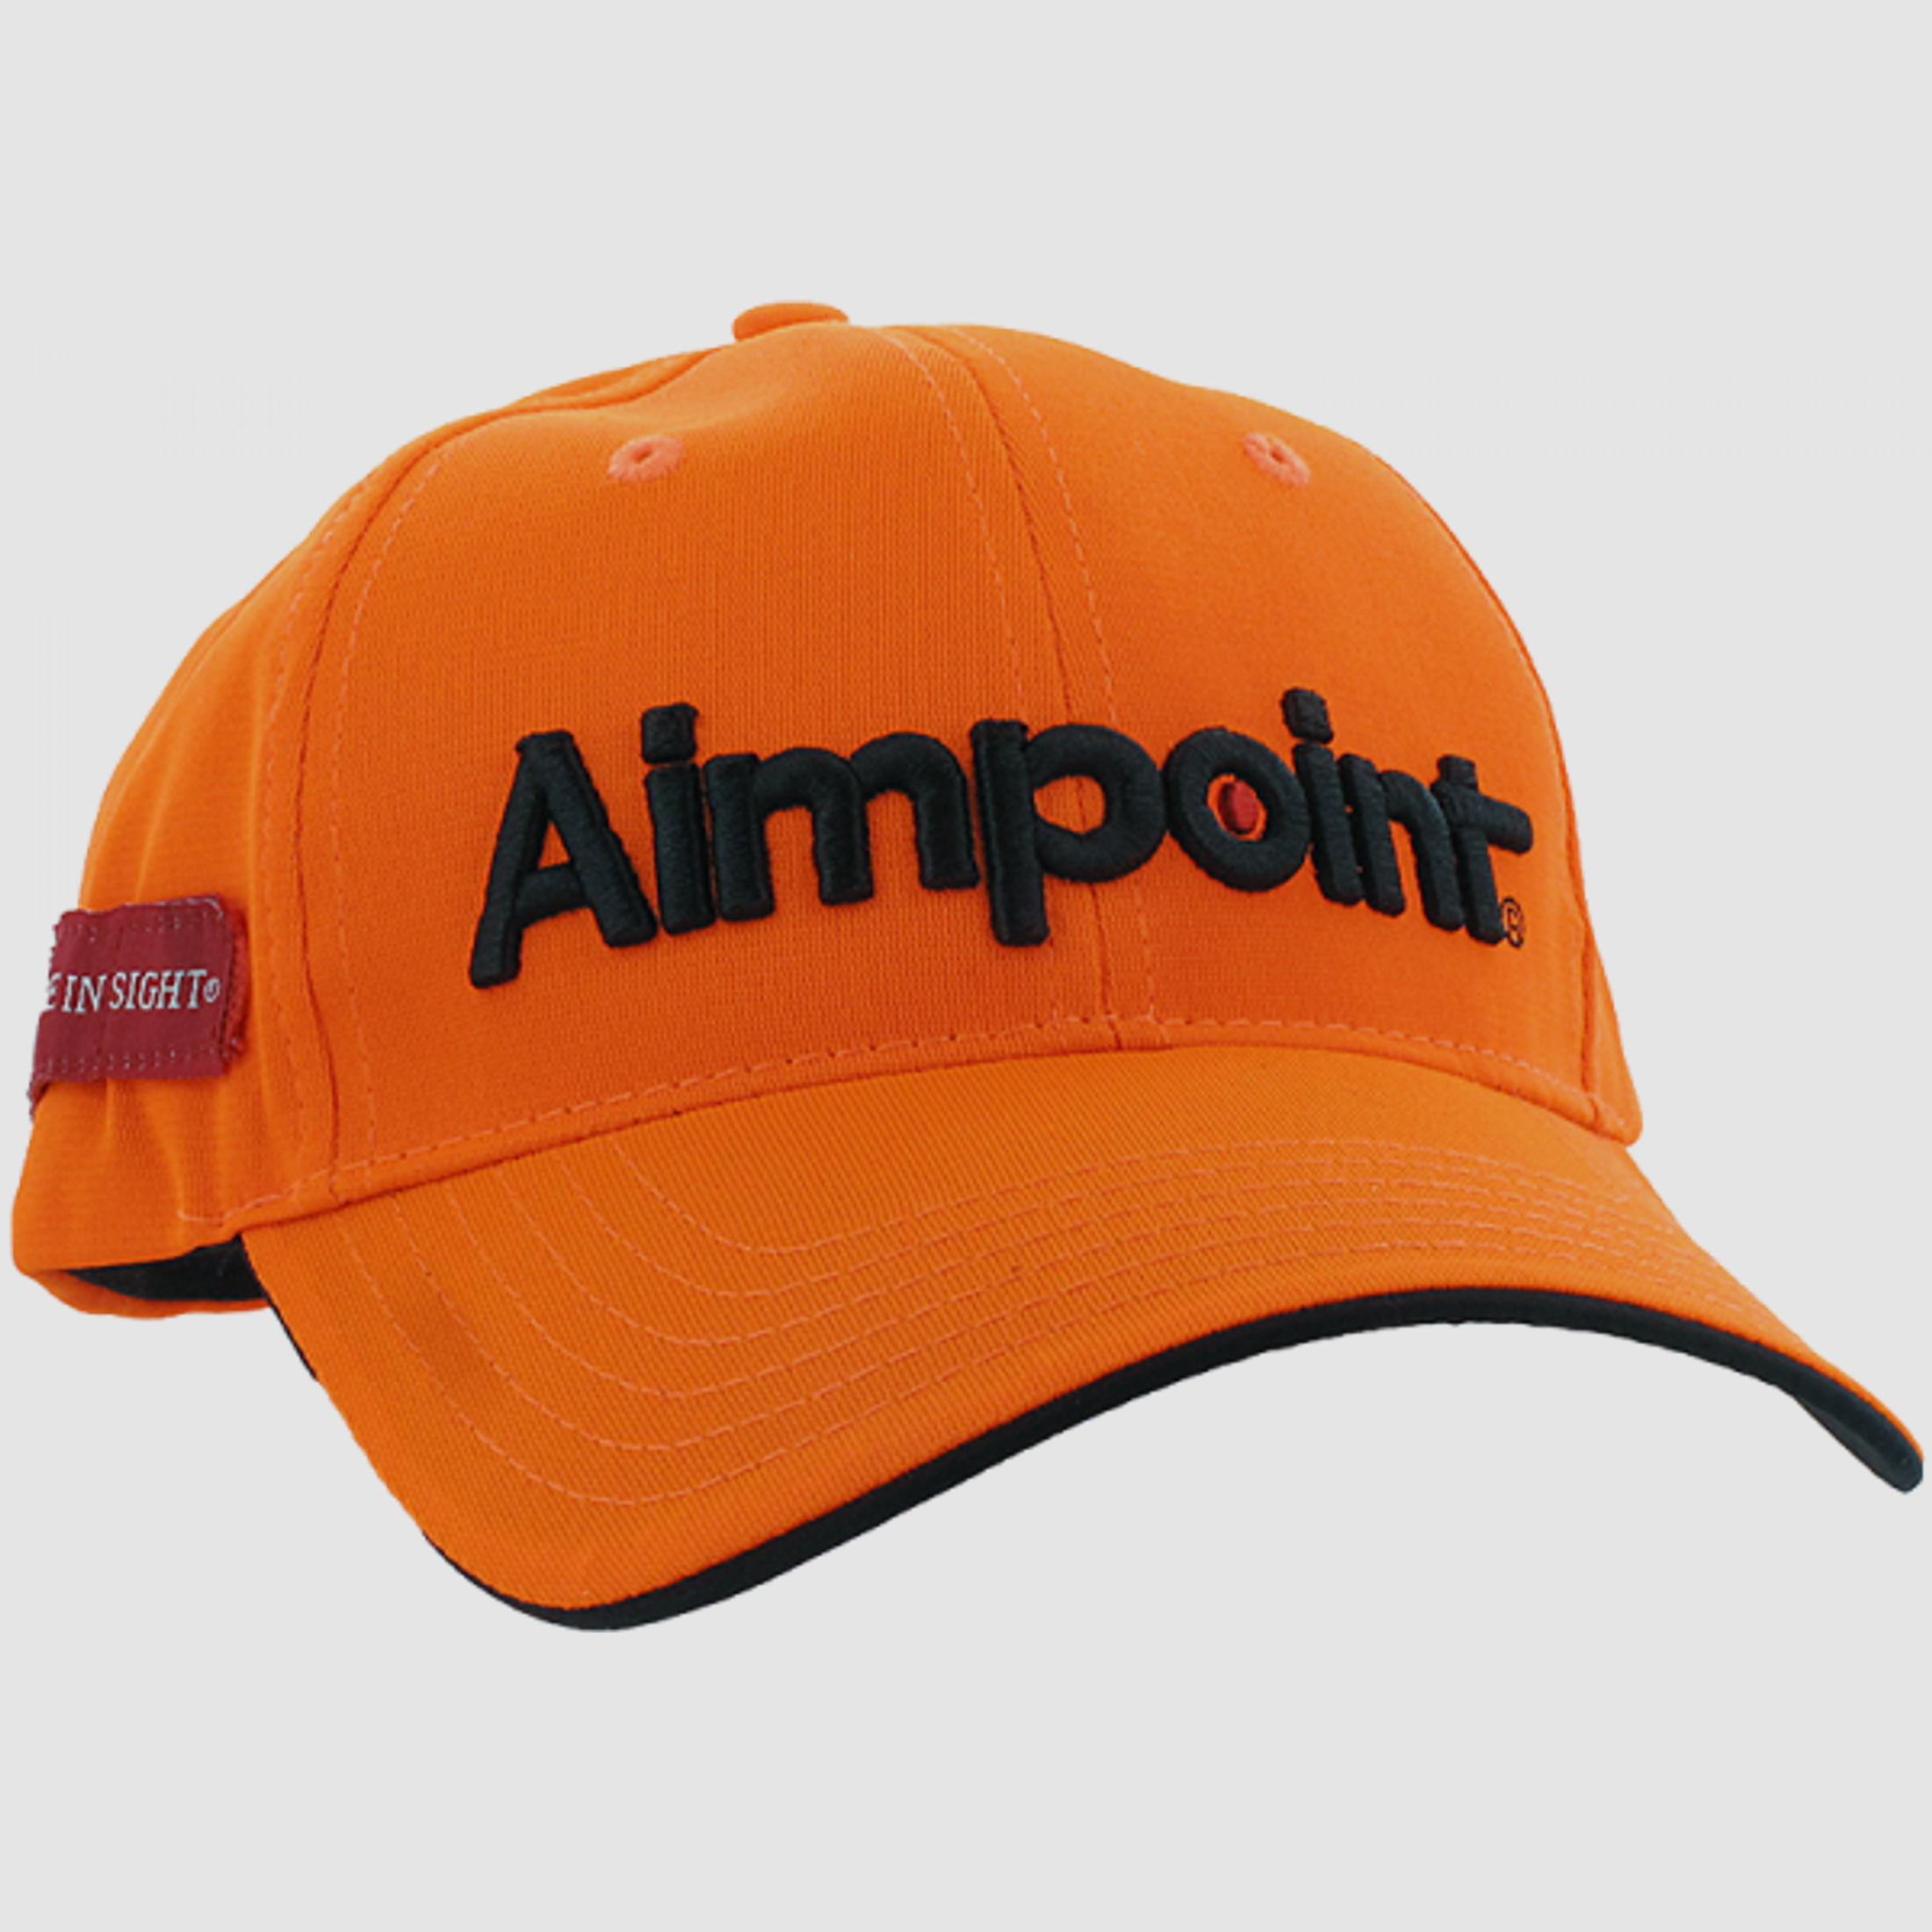 Aimpoint Basecap